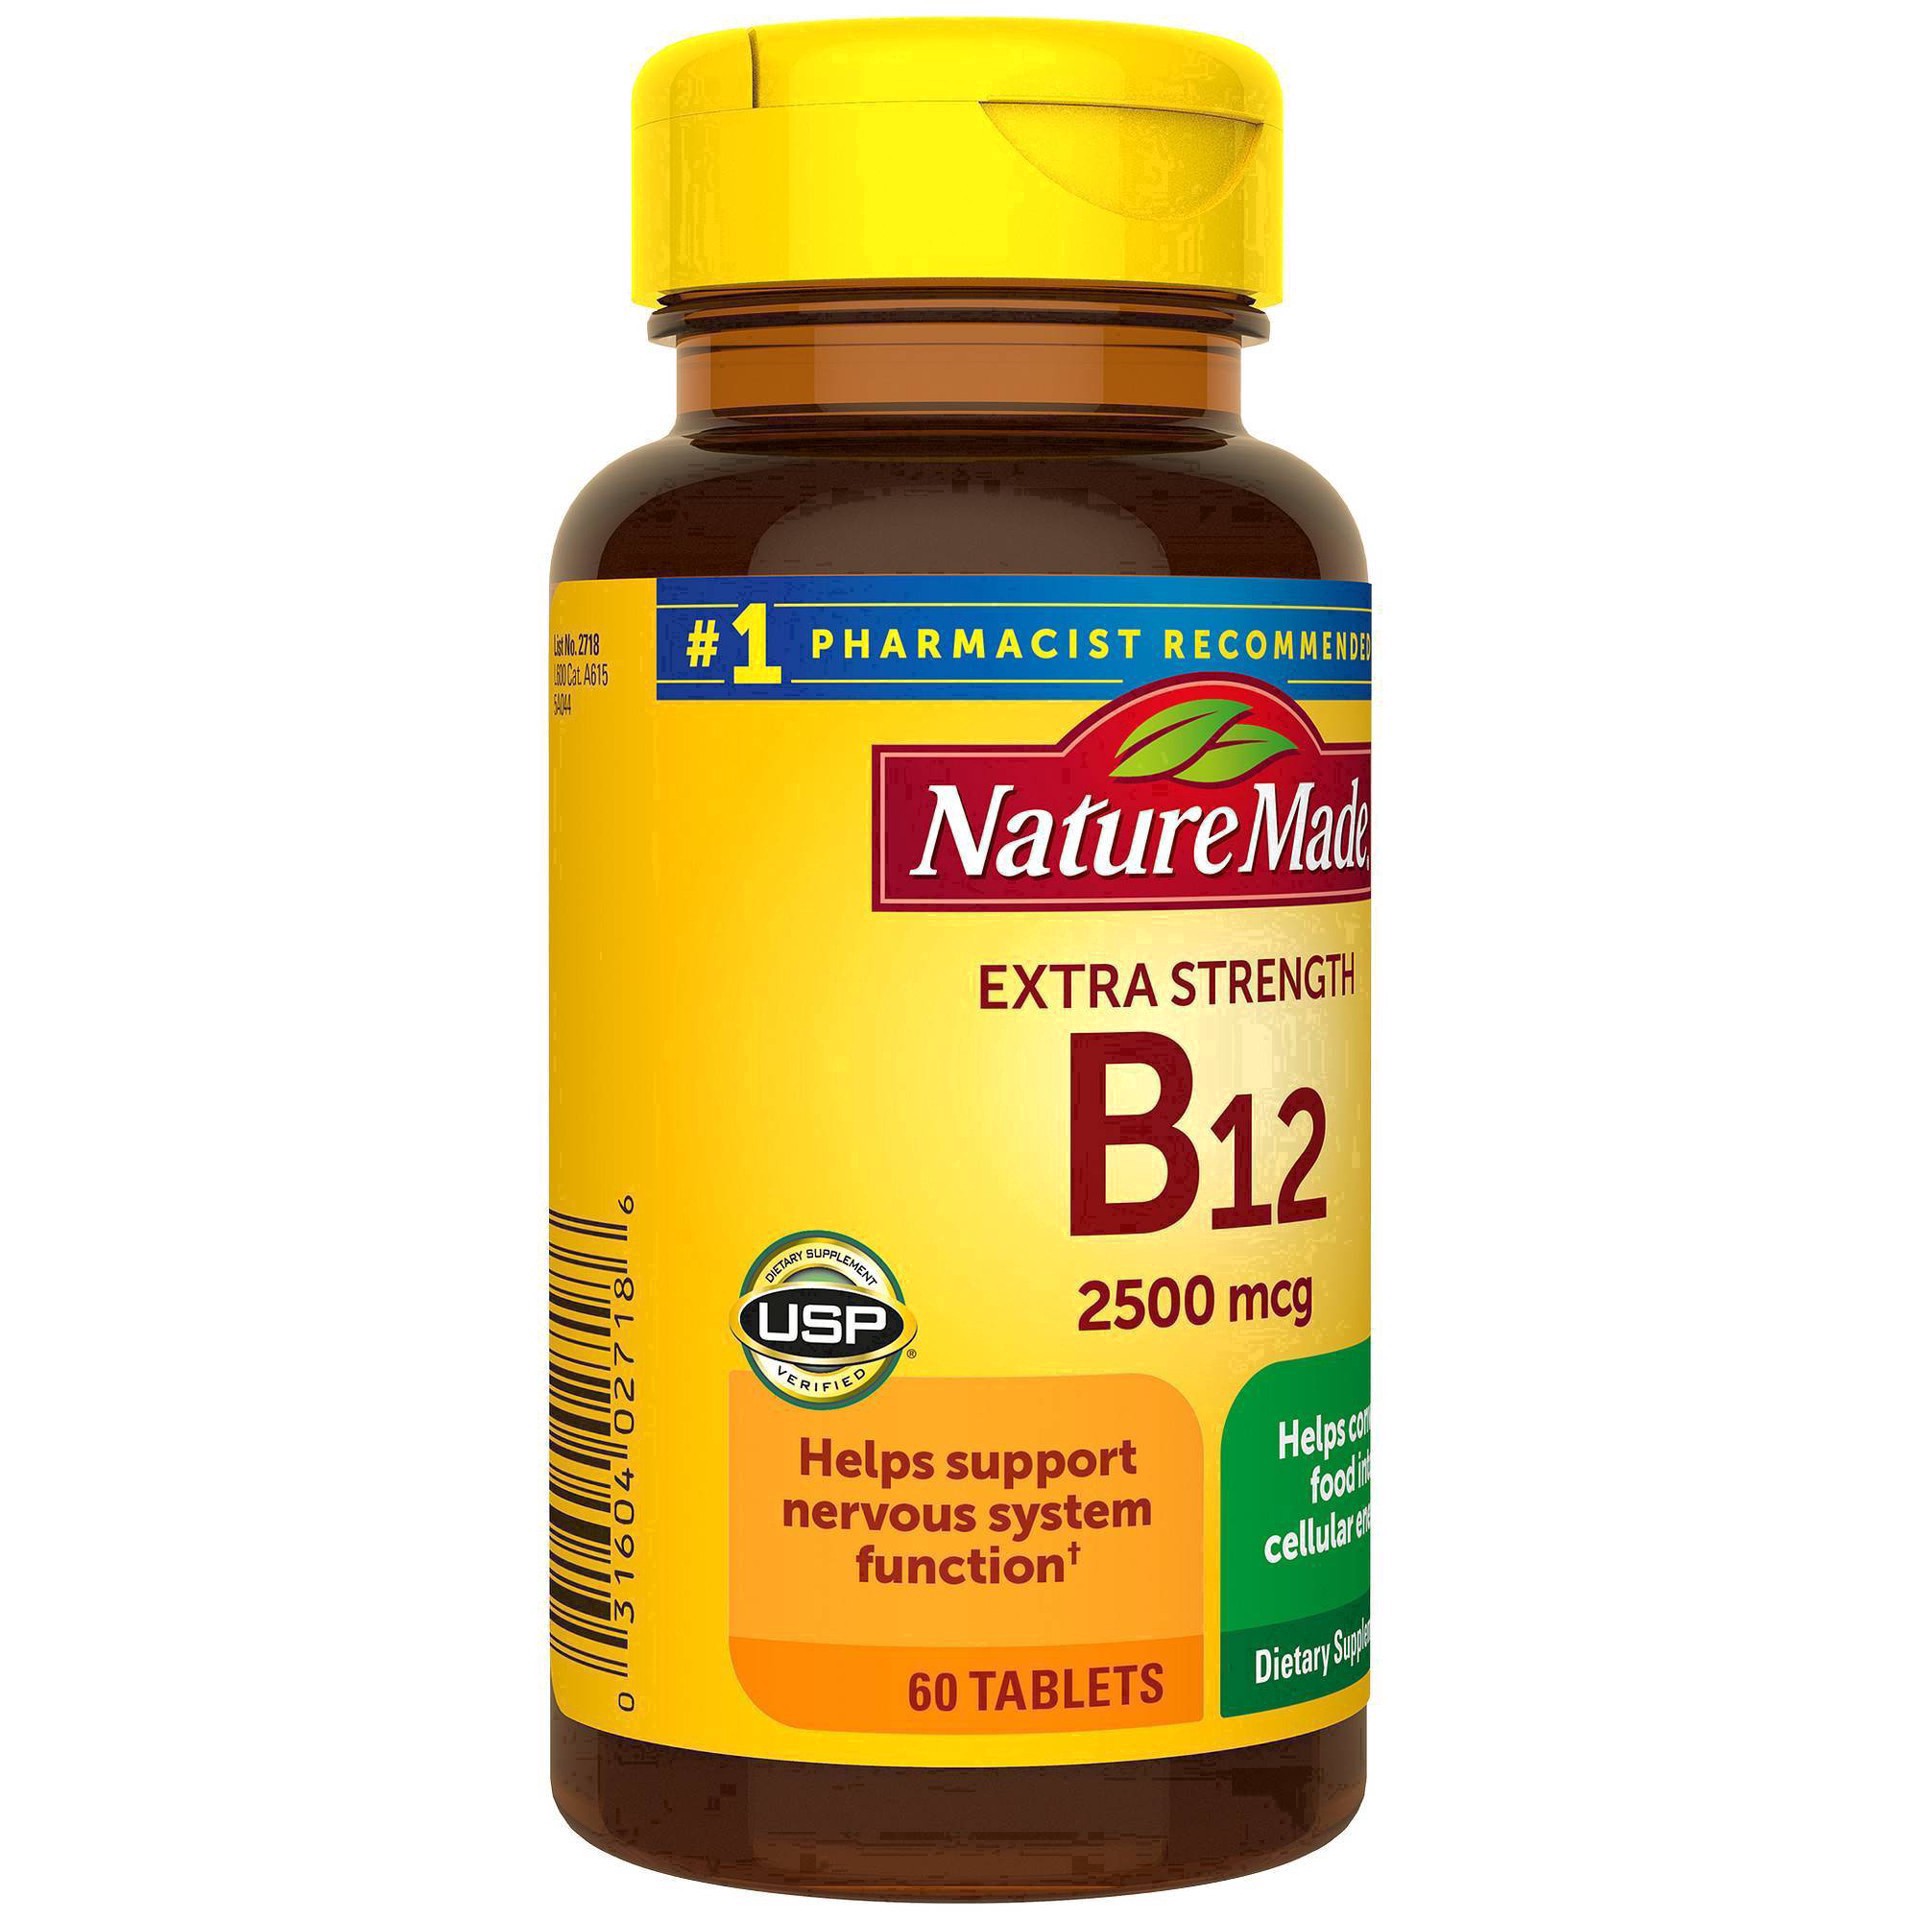 slide 19 of 60, Nature Made Extra Strength Vitamin B12 2500 mcg Tablets for Energy Metabolism Support - 60ct, 60 ct